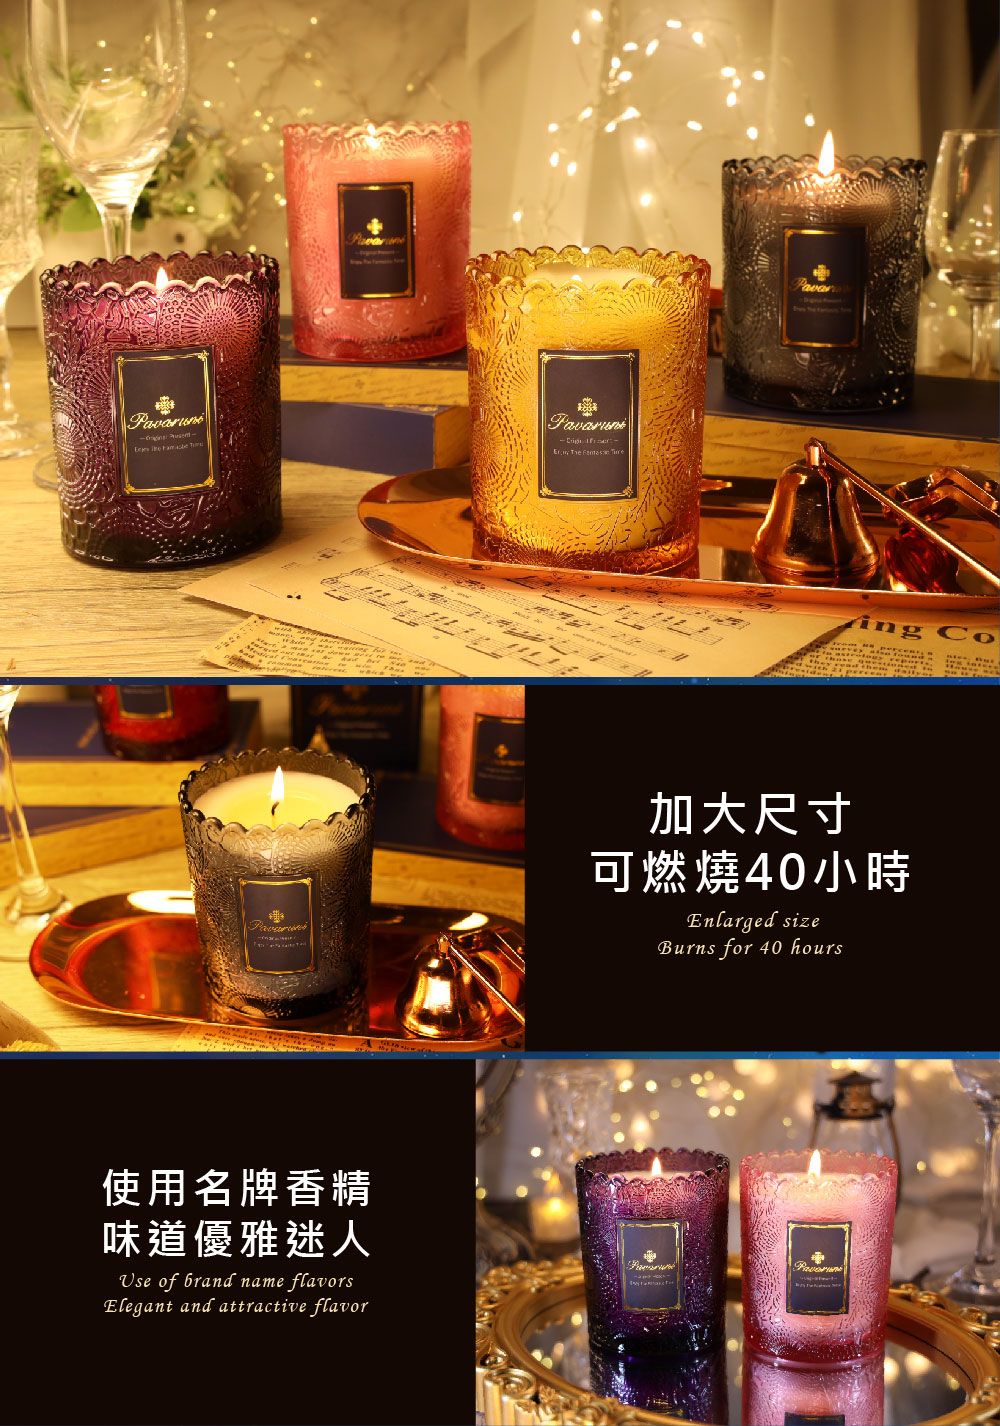 runi   使用名牌香精味道優雅迷人Use of brand name flavorsElegant and attractive flavor   Pavaing 加大尺寸可燃燒40小時Enlarged sizeBurns for 40 hours